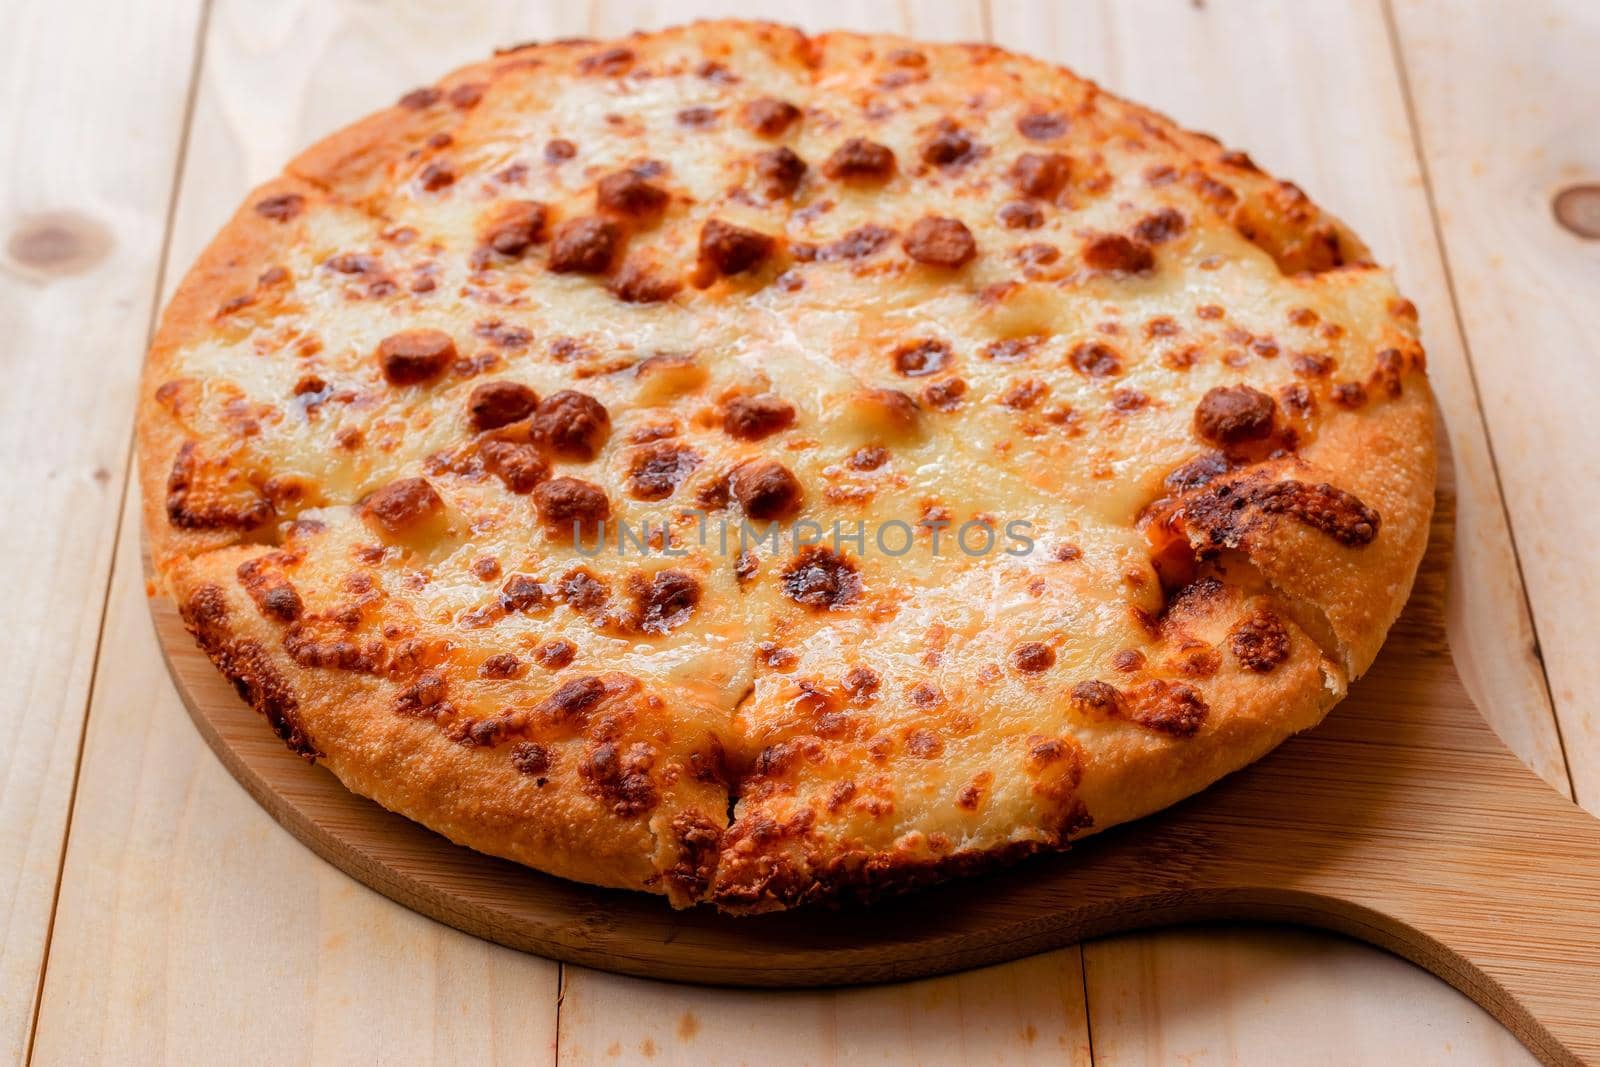 Closeup selective focus of the pizza on a wooden tray on a wooden table.